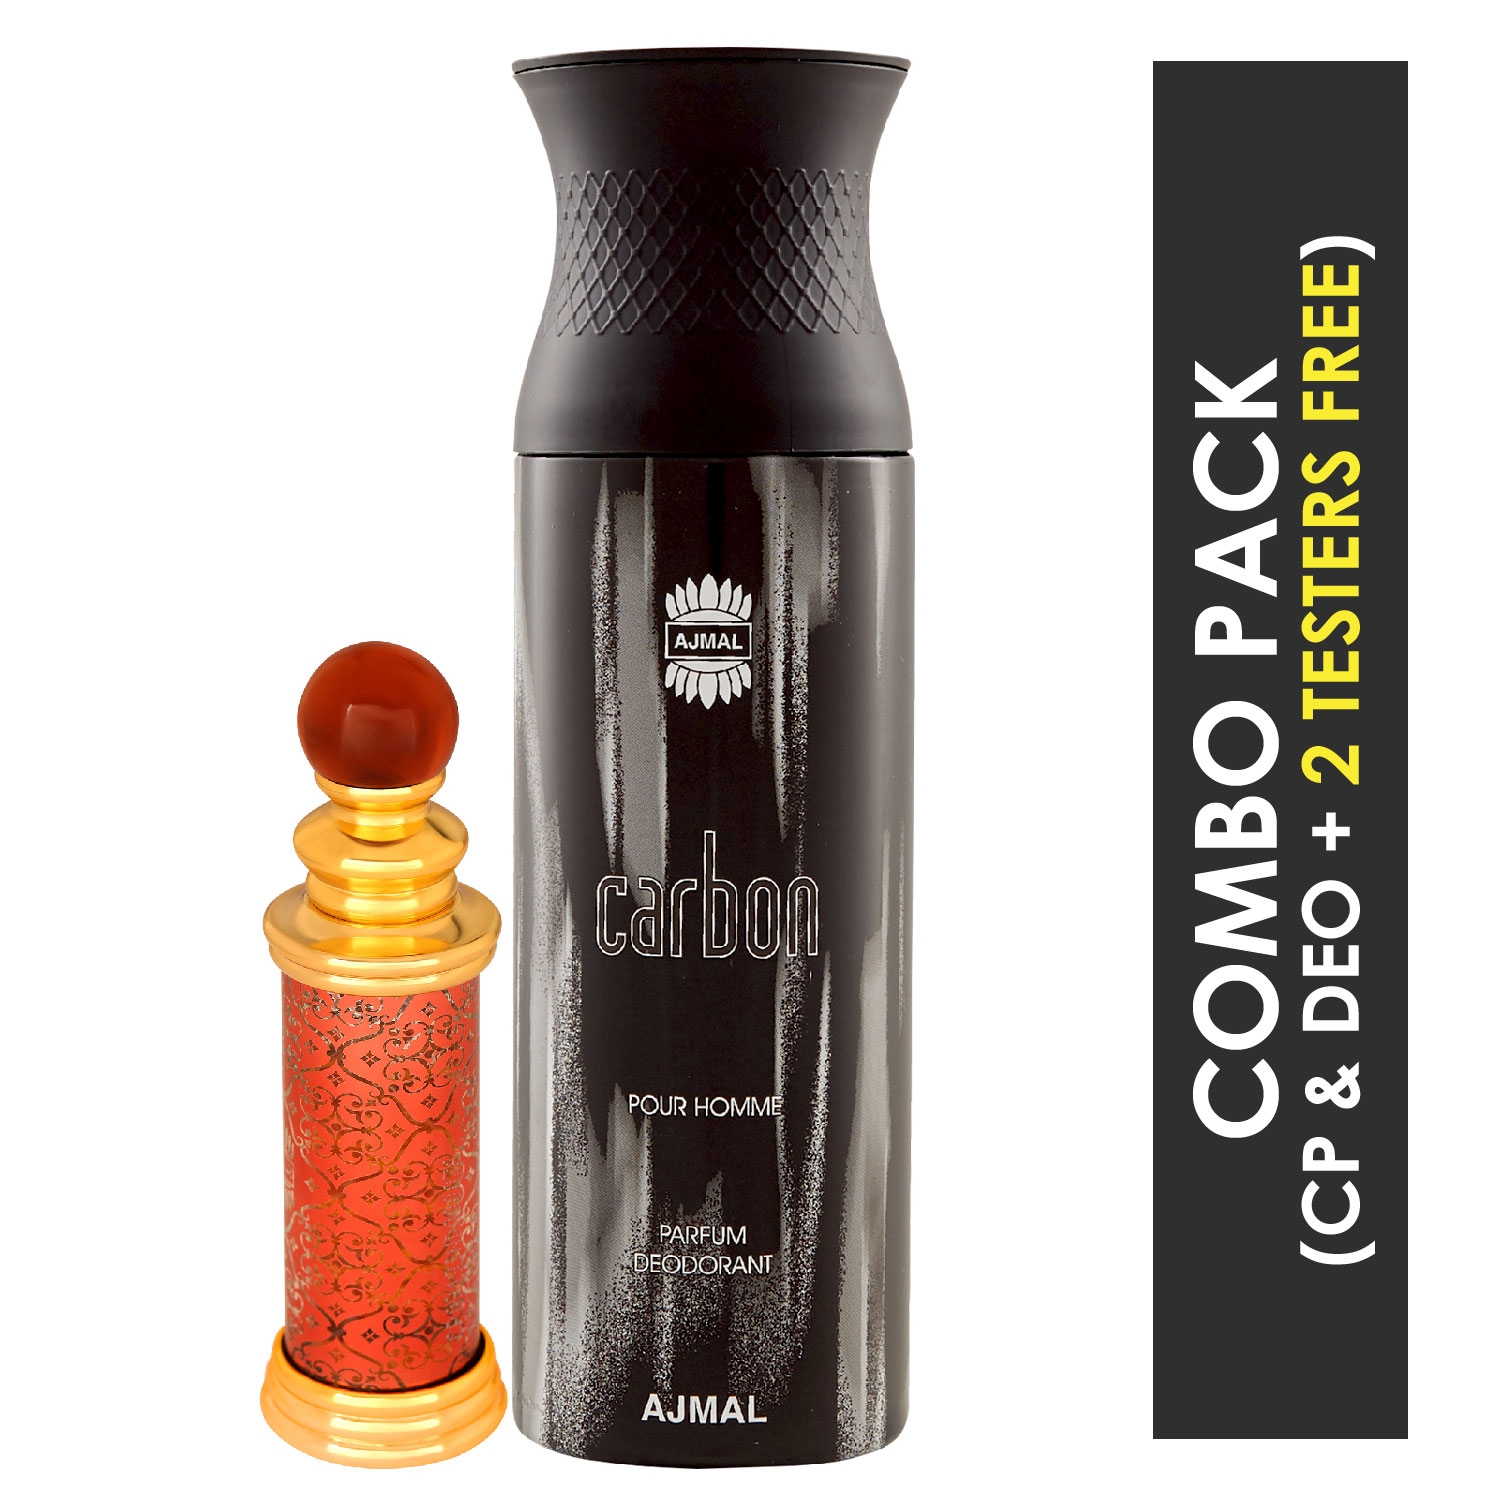 Ajmal | Ajmal Classic Oud Concentrated Perfume Oil Woody Oudh Alcohol-free Attar 10ml for Unisex and Carbon Homme Deodorant Citrus Spicy Fragrance 200ml for Men + 2 Parfum Testers FREE